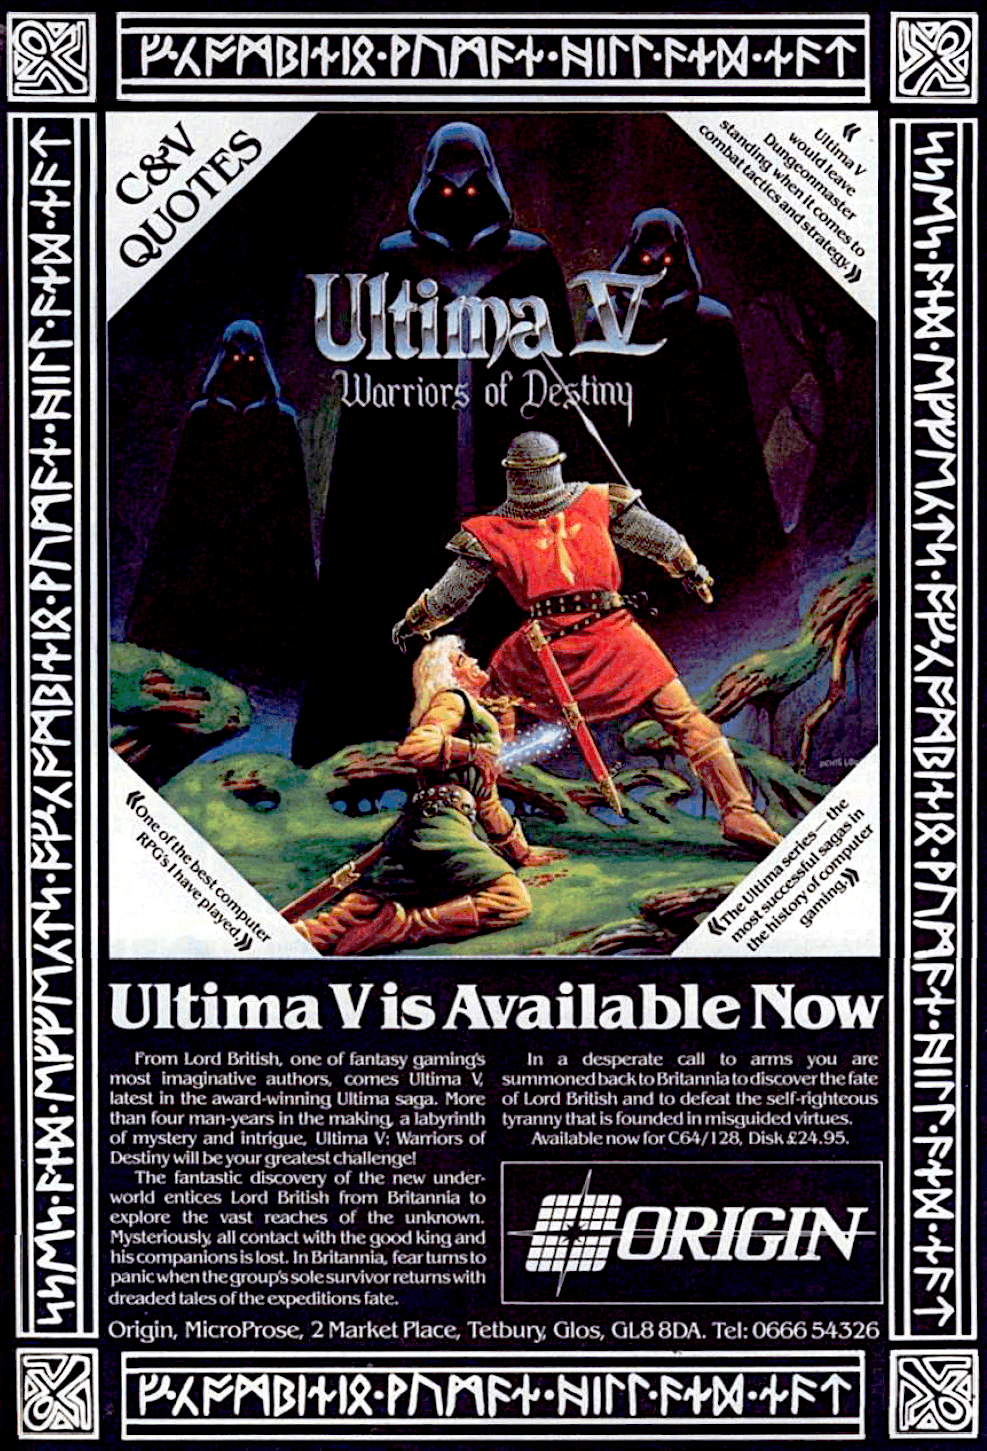 Image For Post | Ultima V: Warriors of Destiny (1988) is the fifth entry in the role-playing video game series Ultima. It is the second in the "Age of Enlightement" trilogy. The game's story take a darker turn from its predecessor Ultima IV. Britannia's king Lord British is missing, replaced by a tyrant named Lord Blackthorn. The player must navigate a totalitarian world bent on enforcing its virtues through draconian means.